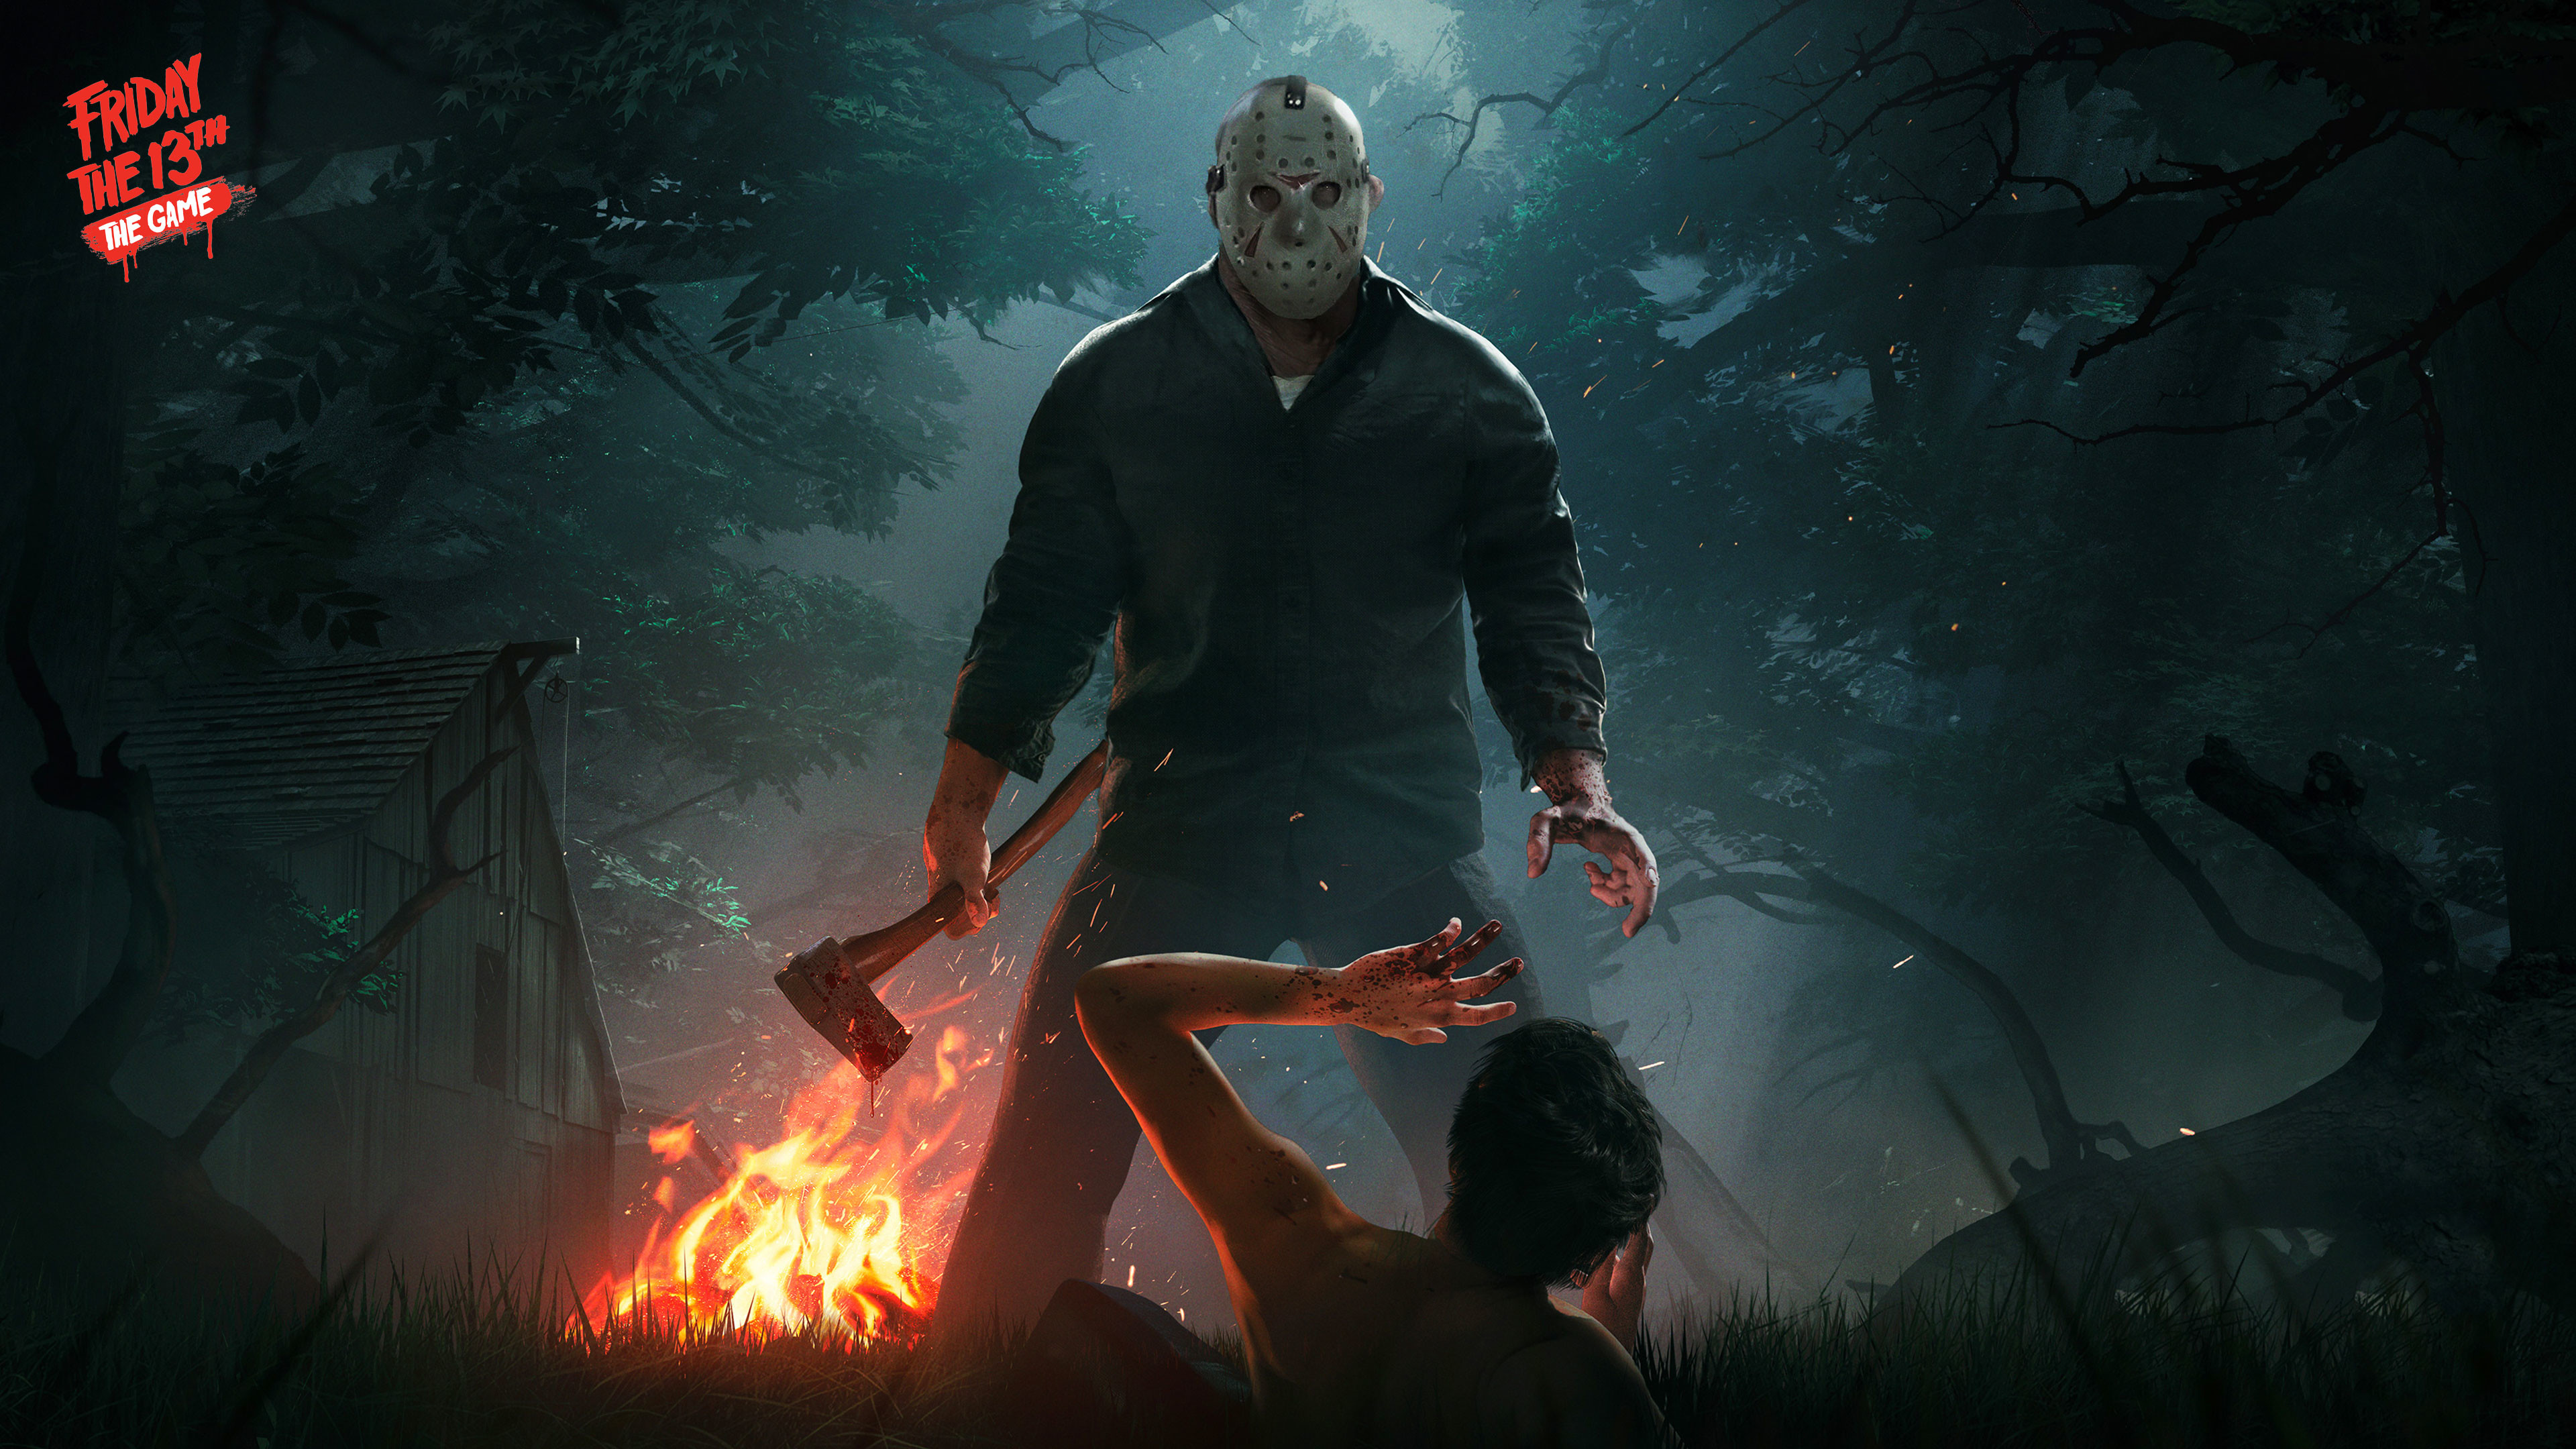 3840x2160 Friday the 13th the game 4K Wallpaper ...